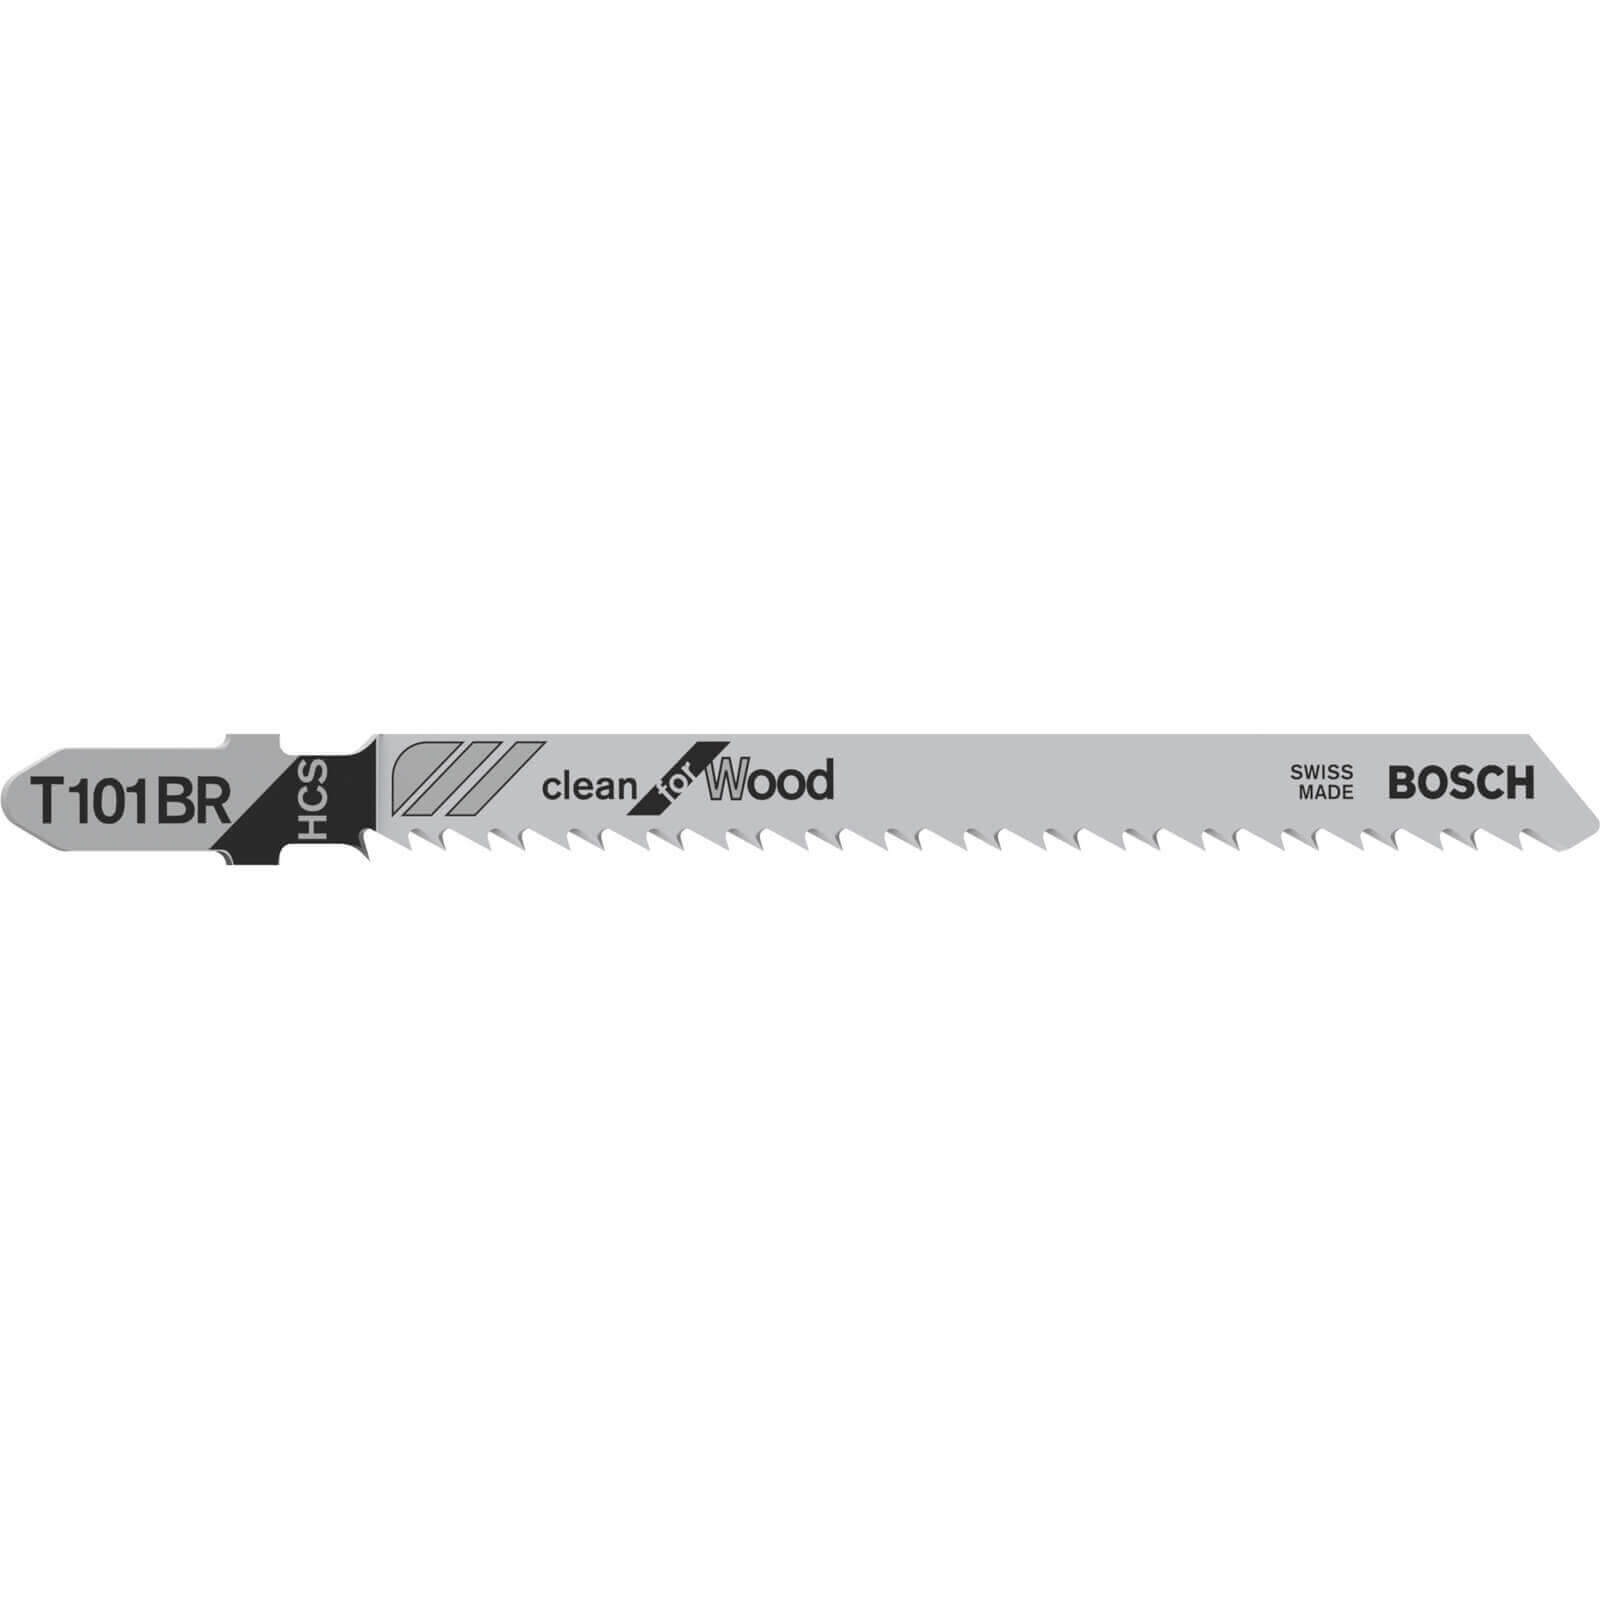 Photo of Bosch T101br Down Cutting Wood Jigsaw Blades Pack Of 3